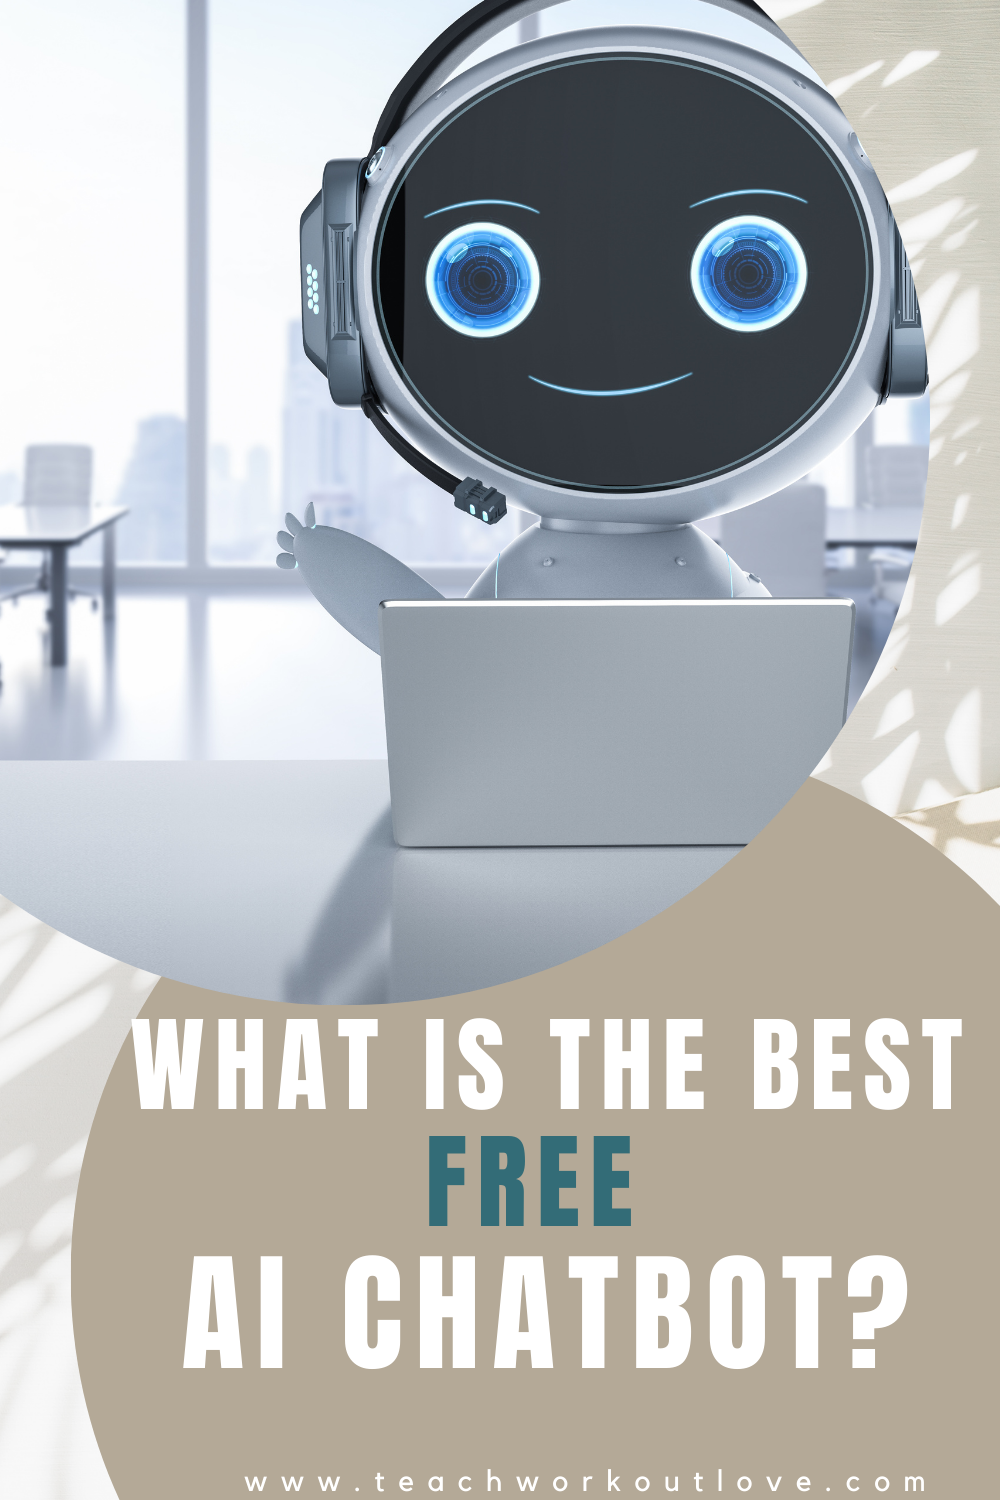 This introduction focuses on free AI chatbots, highlighting their widespread appeal and accessibility, offering cost-effective solutions for users ranging from small businesses to individual consumers seeking efficient, 24/7 assistance.